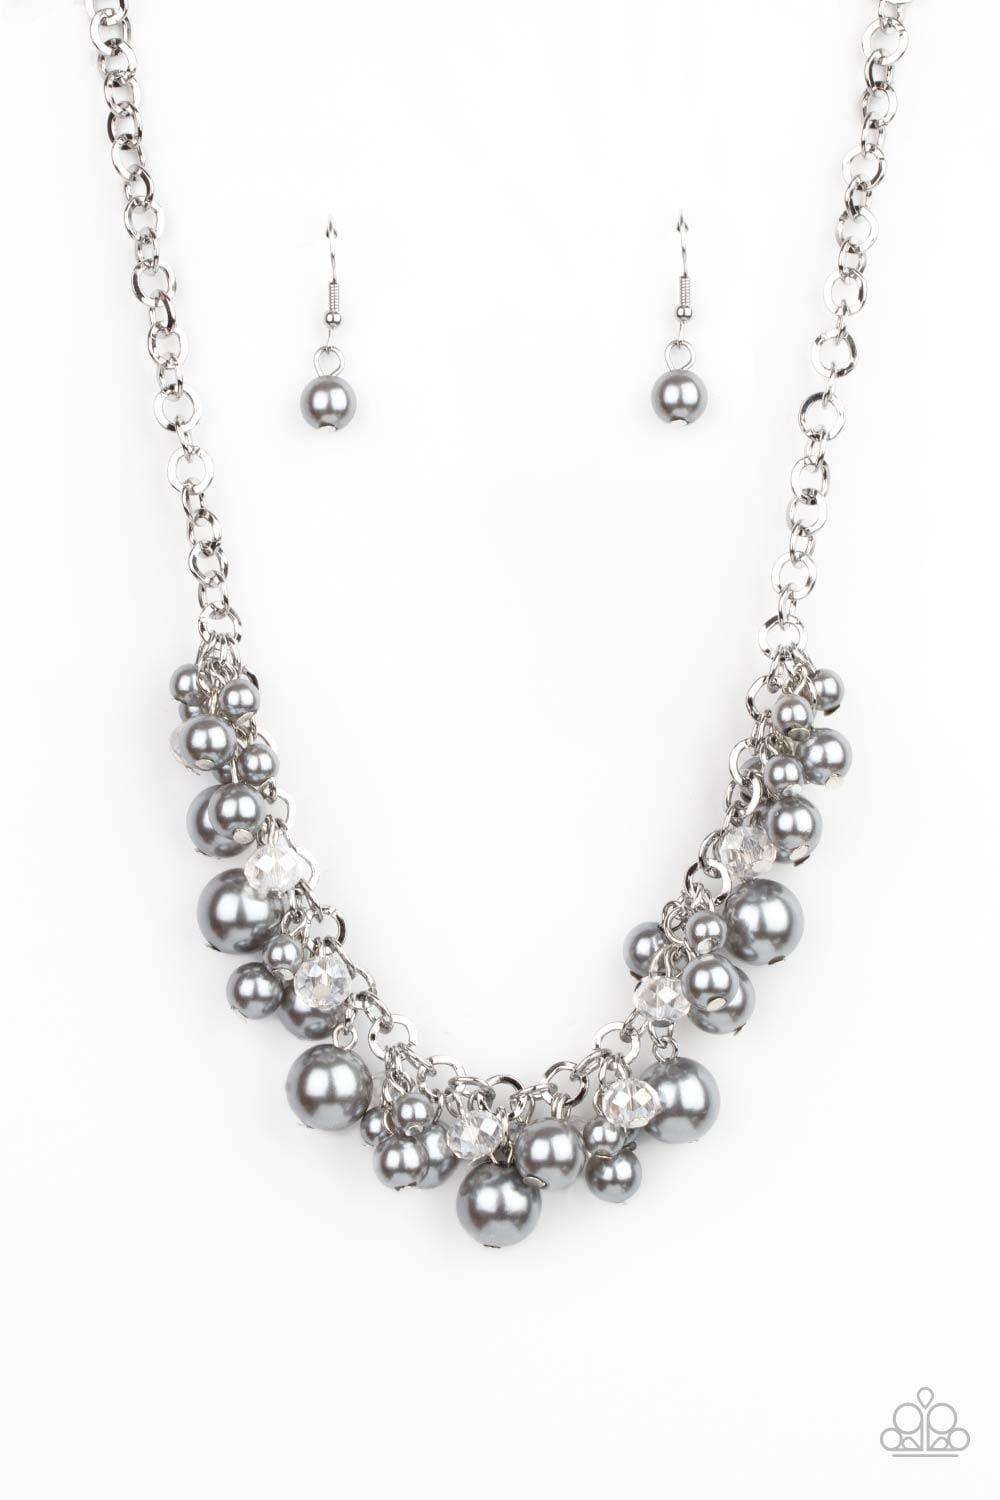 Paparazzi Accessories - Positively Pearl-escent - Silver Necklace - Bling by JessieK